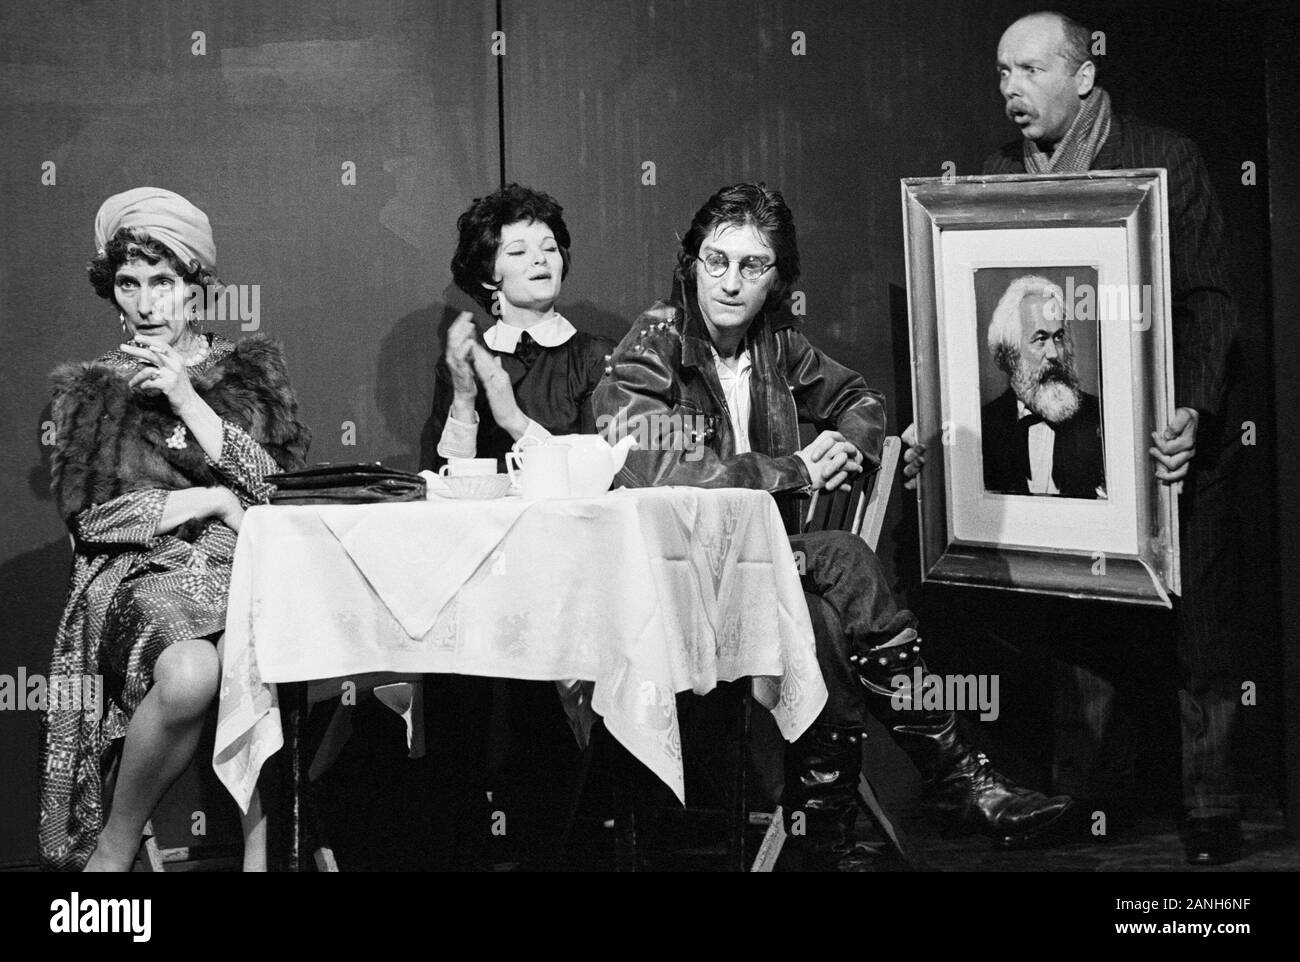 June Brown (Mrs Biledew), Isabel Dean (Angie), Billy Hamon (Noel) and Roger Sloman, (Biledew) in CLAW by Howard Barker at the Open Space Theatre, London NW1 in 01/1975 June Muriel Brown MBE, born 1927, English actress well known for her role as Dot Cotton in the BBC soap opera EAST ENDERS from 1985 Stock Photo